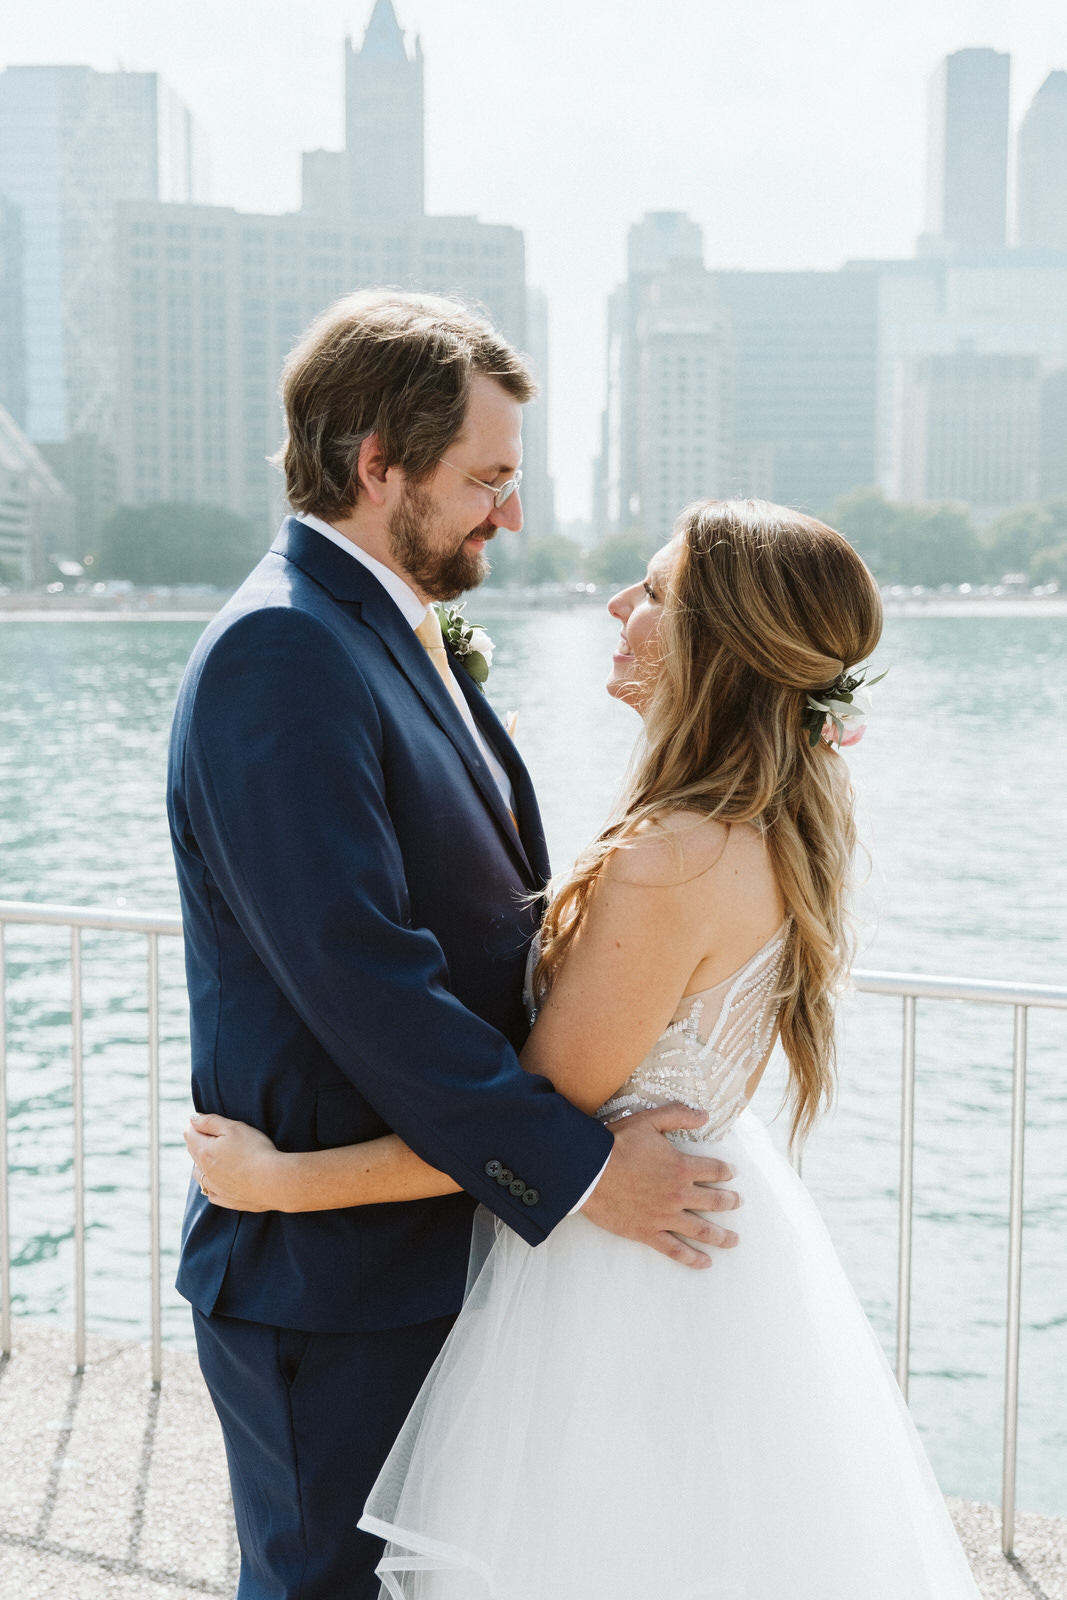 Small Wedding Venues in Chicago photo featuring a couple standing looking at one another. Photo by Michael & Kristin wedding photography and videography.